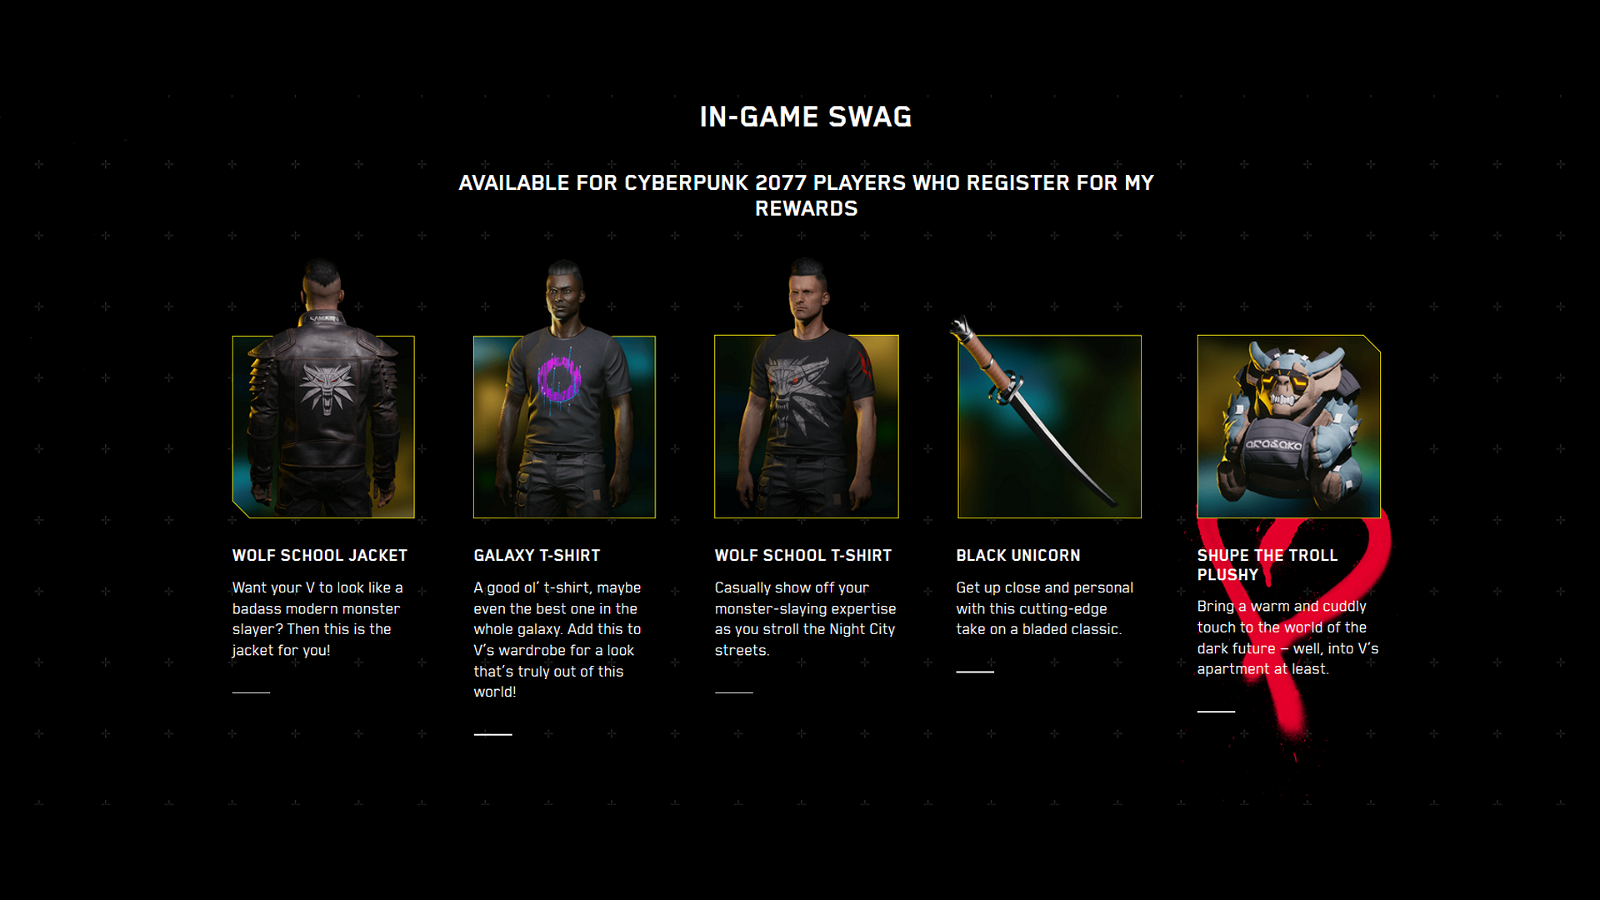 Free in-game items for all Cyberpunk 2077, including Phantom Liberty owners